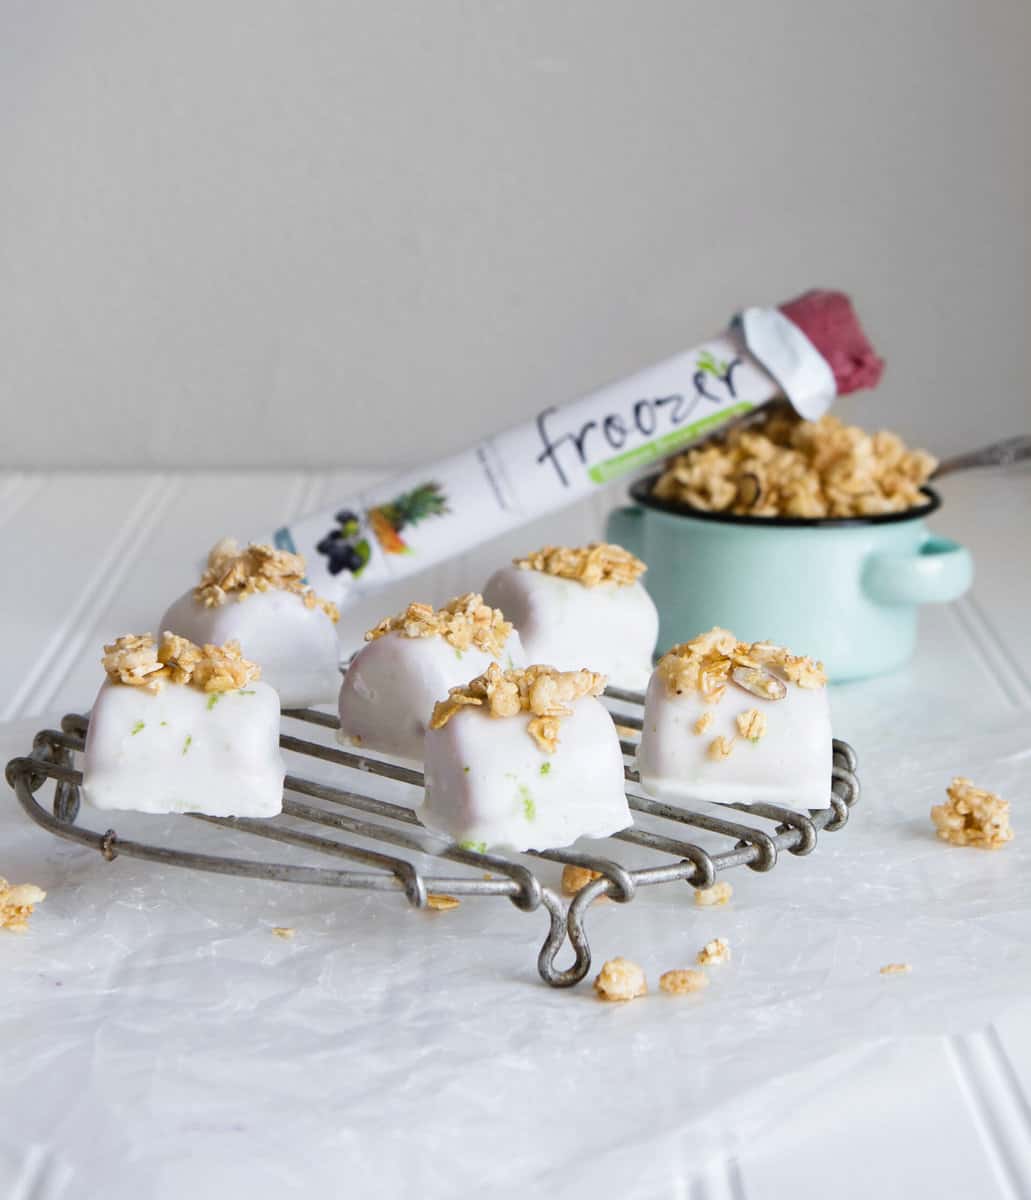 These healthy tropical smoothie bites are enrobed in a silky-smooth lime coconut milk and topped with granola for a satisfying sweet treat. | from Lauren Grant of Zestful Kitchen